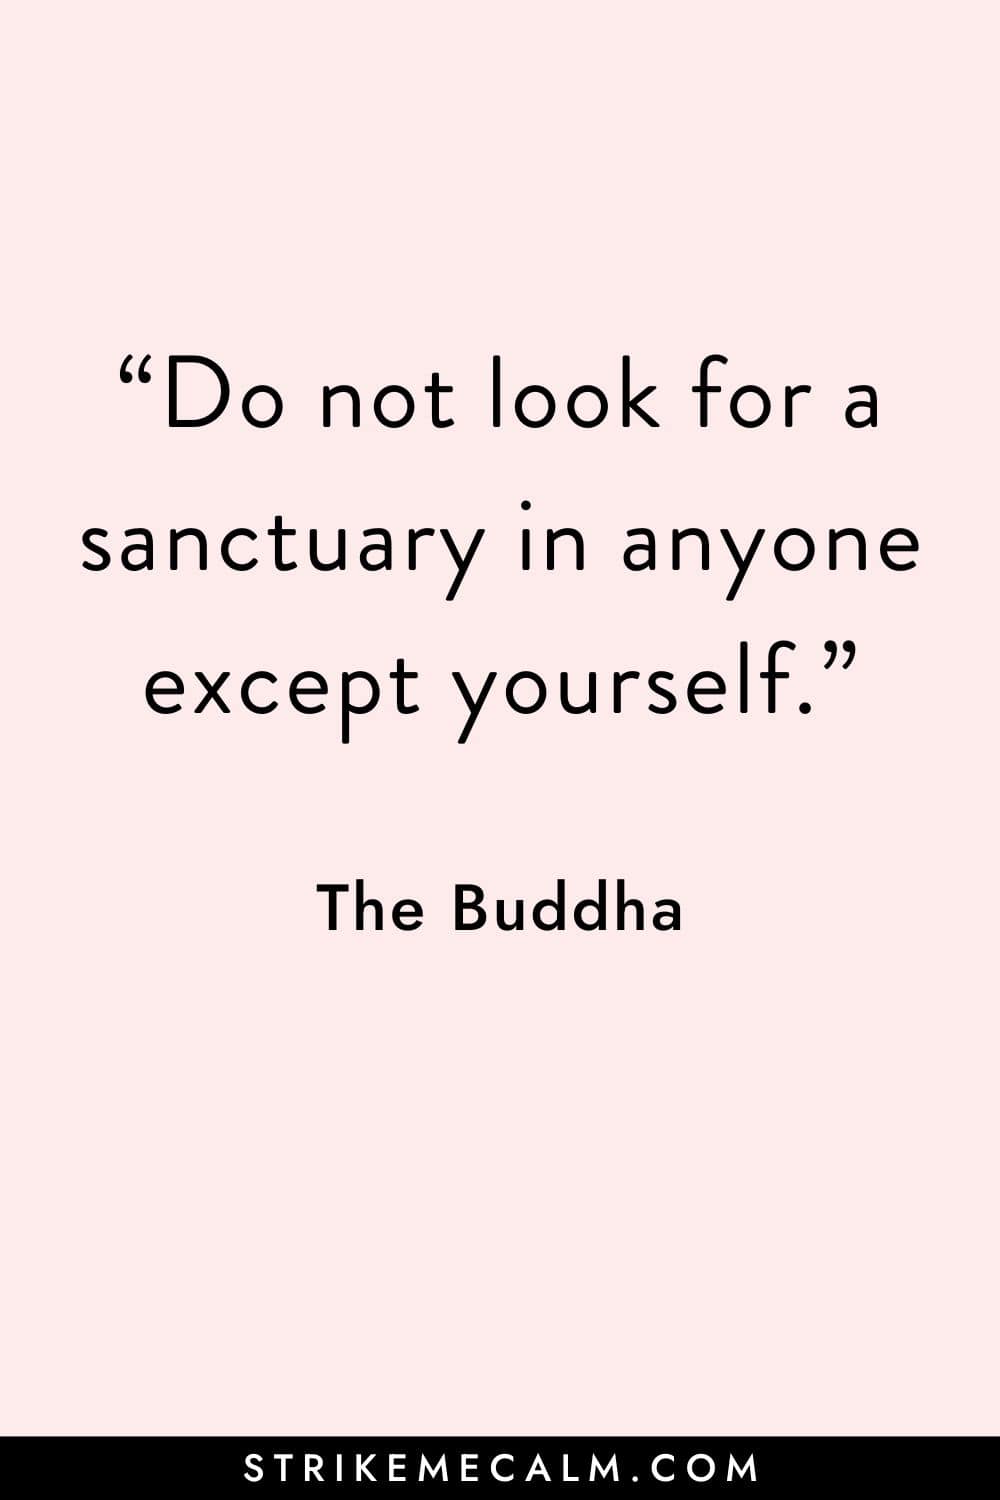 24 Inspiring Buddha Quotes on Changing Yourself